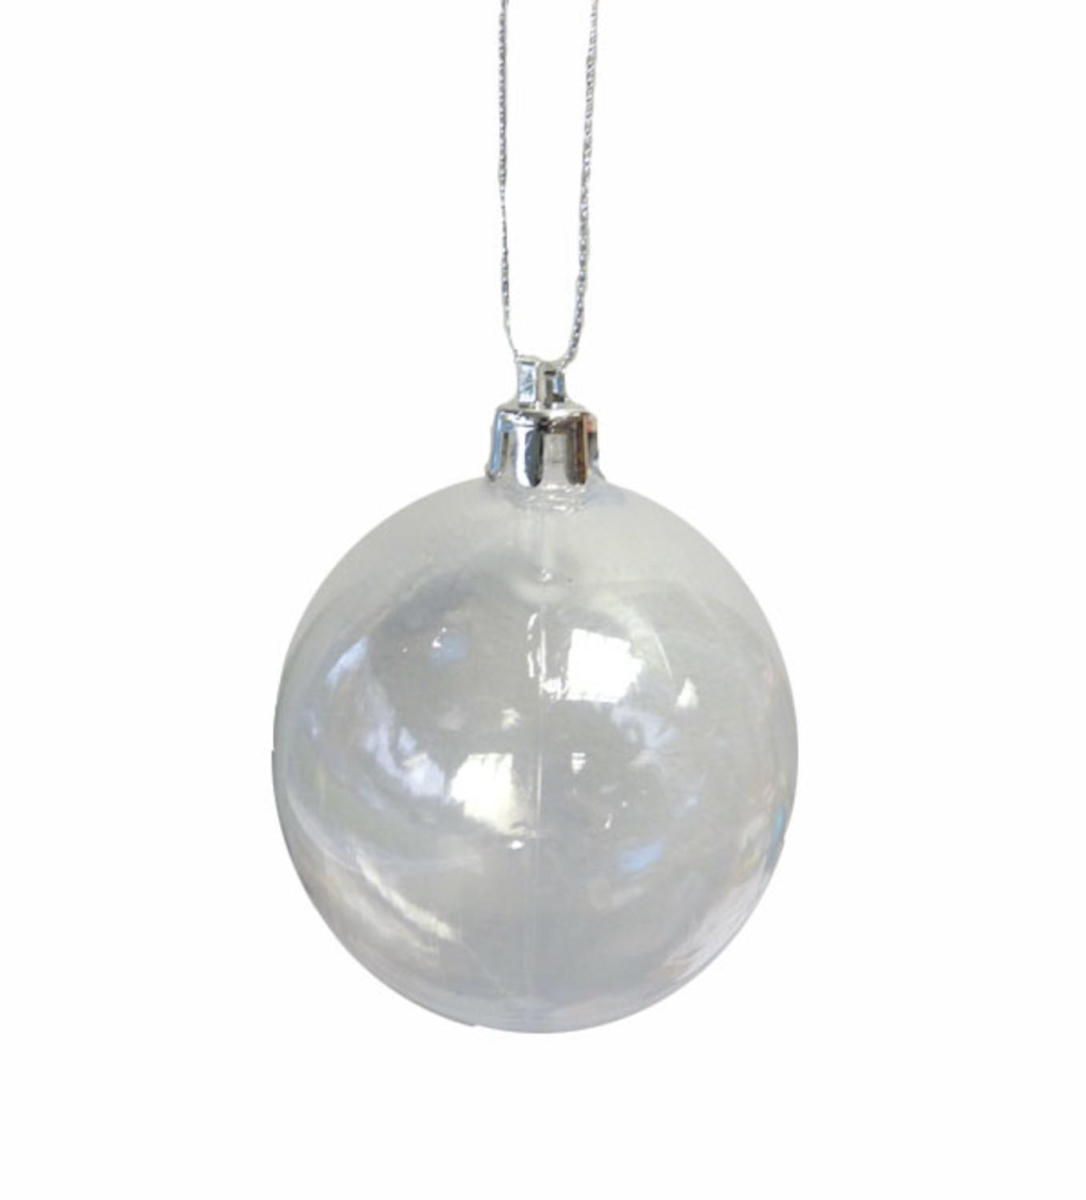 21297652 2.5 In. X 60 Mm Clear Transparent Shatterproof Christmas Ball Ornament